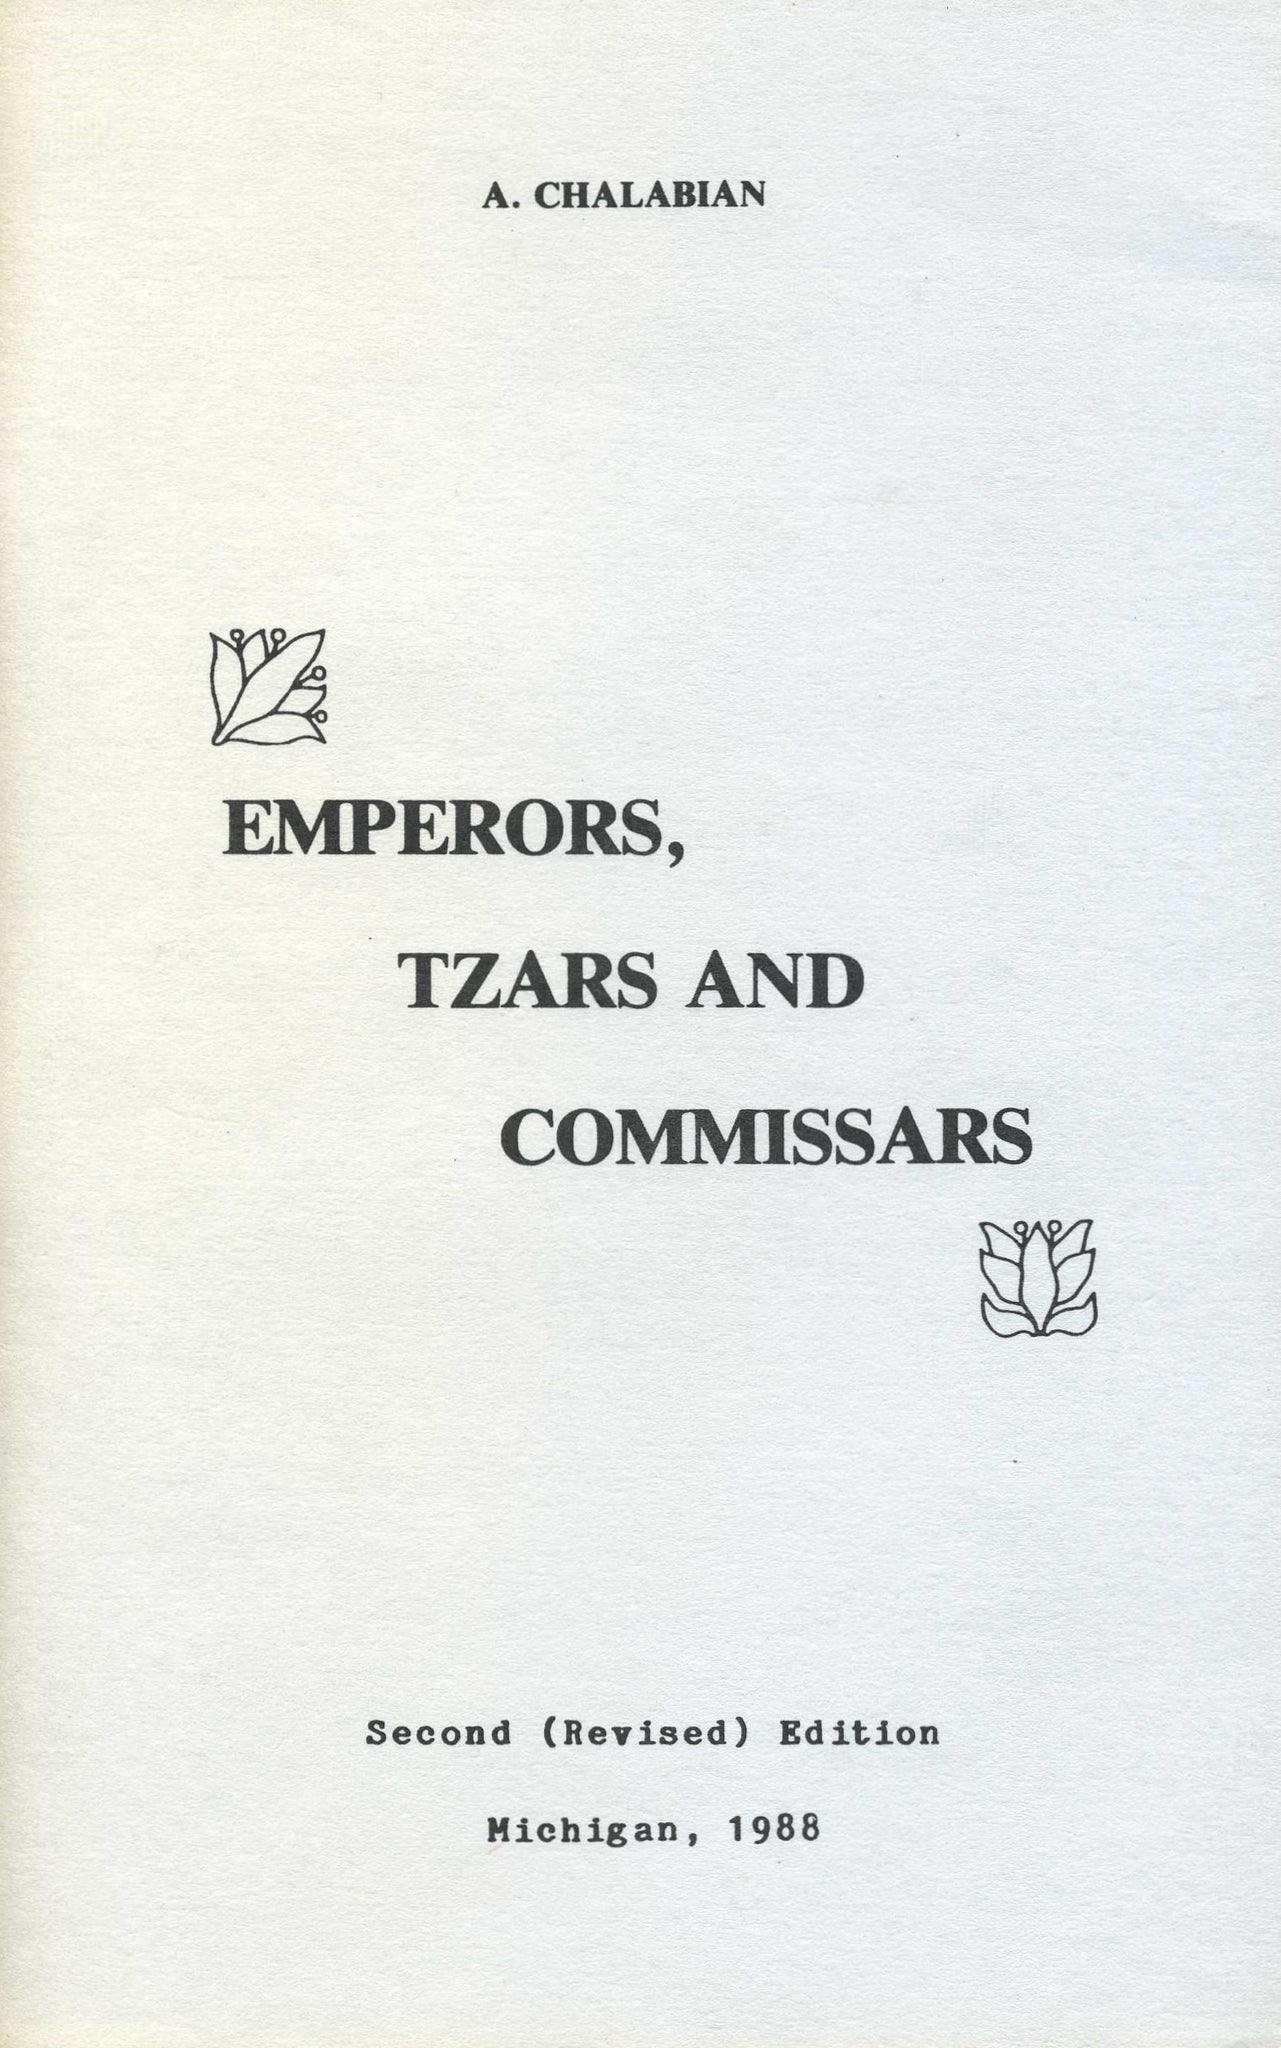 EMPERORS, TZARS AND COMMISSARS